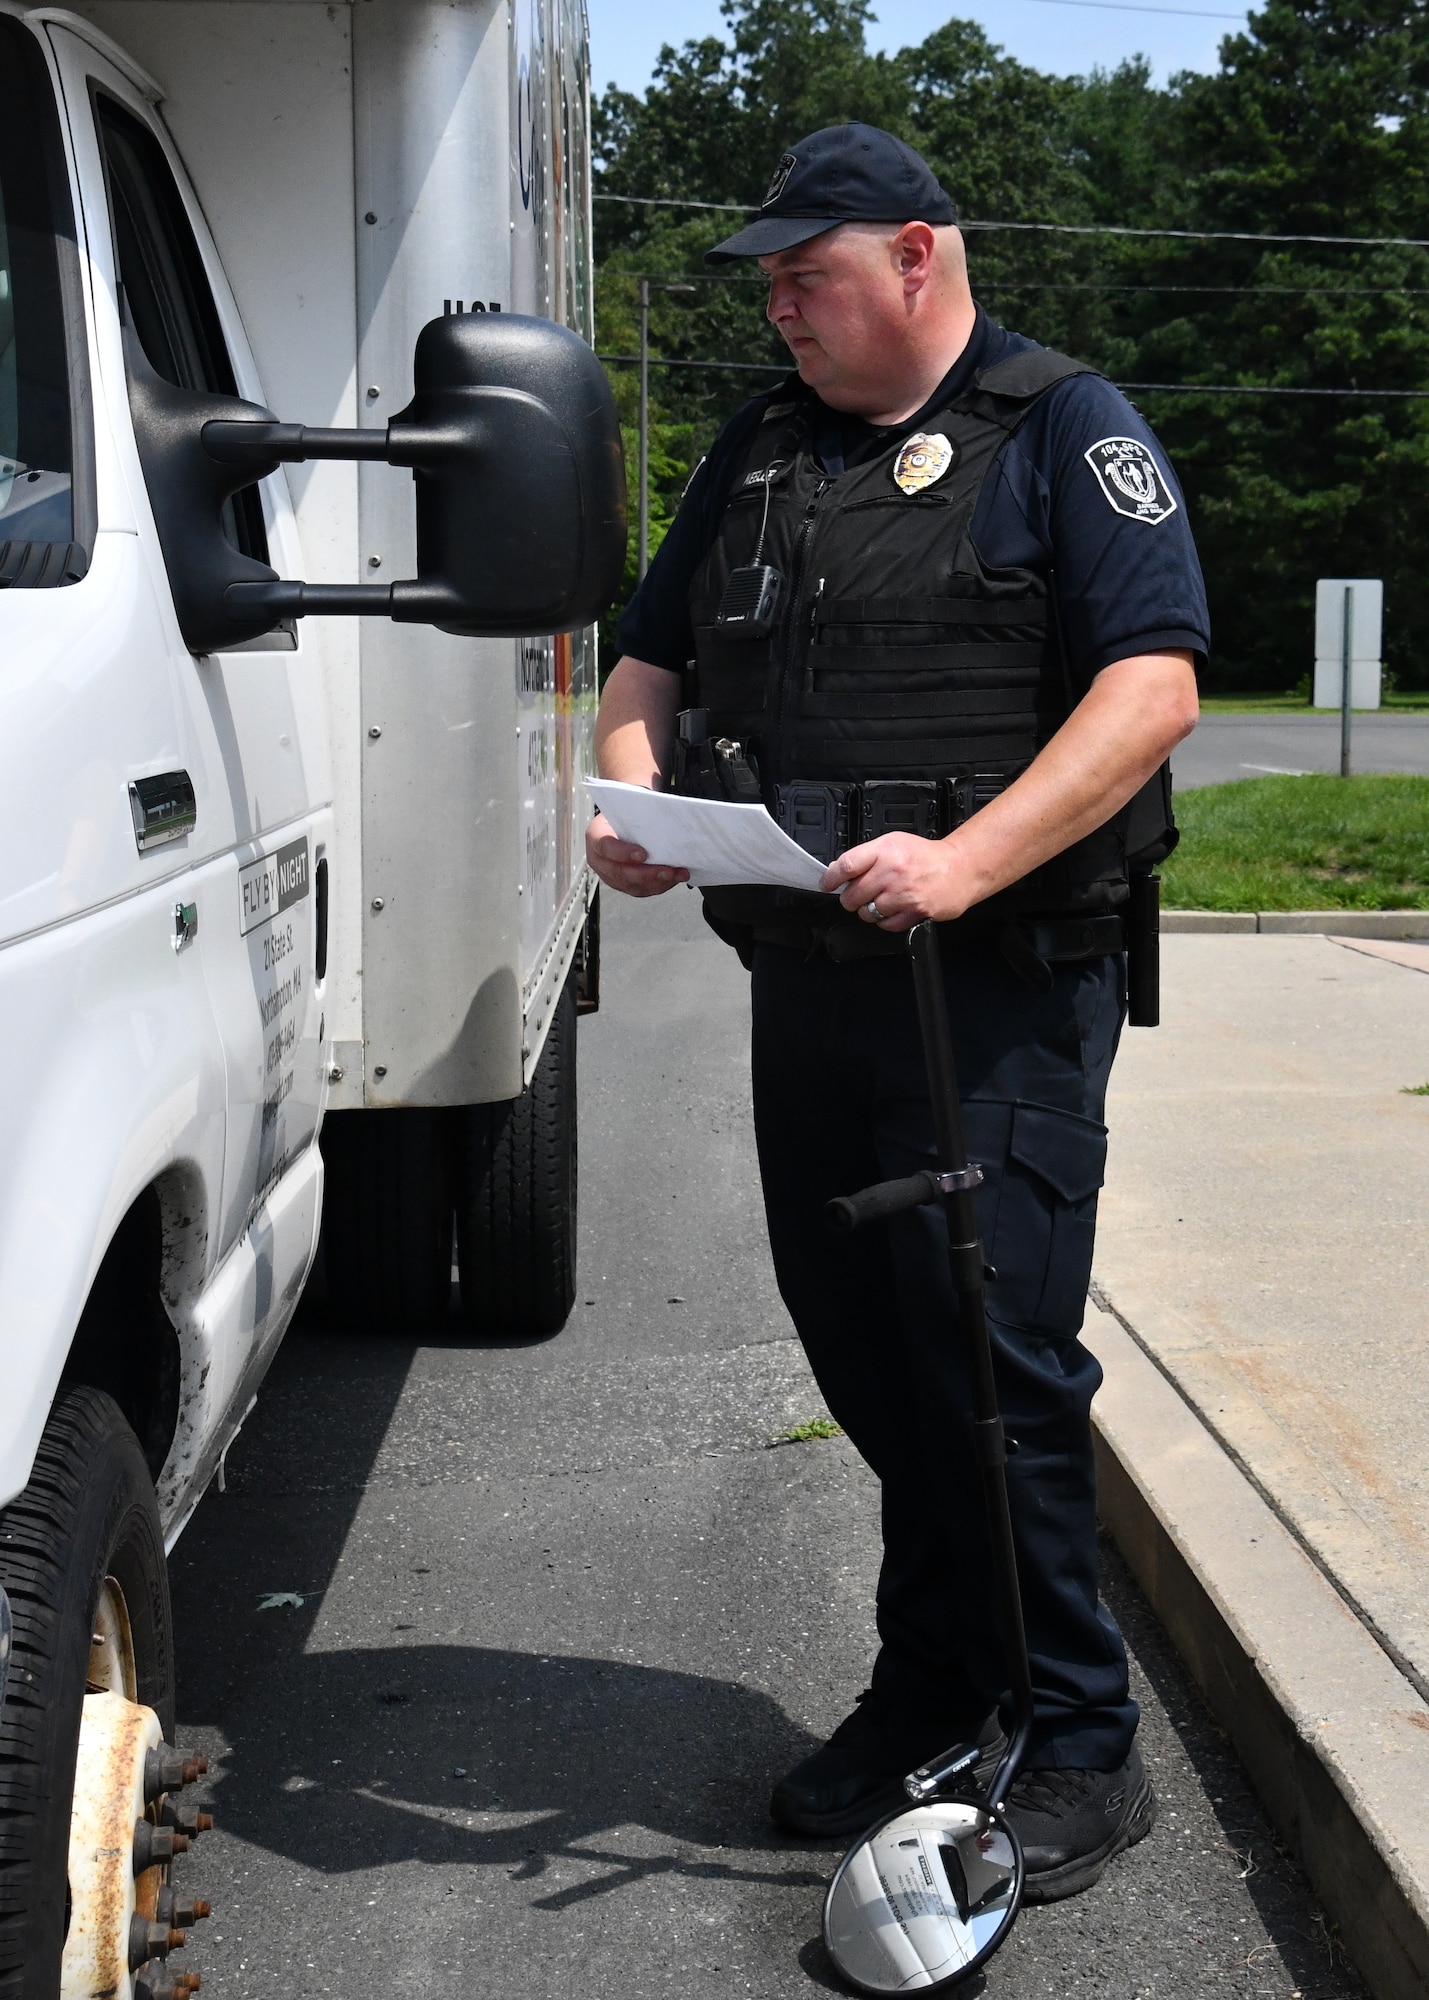 Officer Robert Keeler, 104th Fighter Wing Installation Security Officer, inspects a commercial vehicle looking for contraband July 21, 2021, at Barnes Air National Guard Base, Massachusetts. Keeler works with other civilian officers and military defenders to ensure safety on base.  (U.S. Air National Guard photo by Staff Sgt. Sara Kolinski)